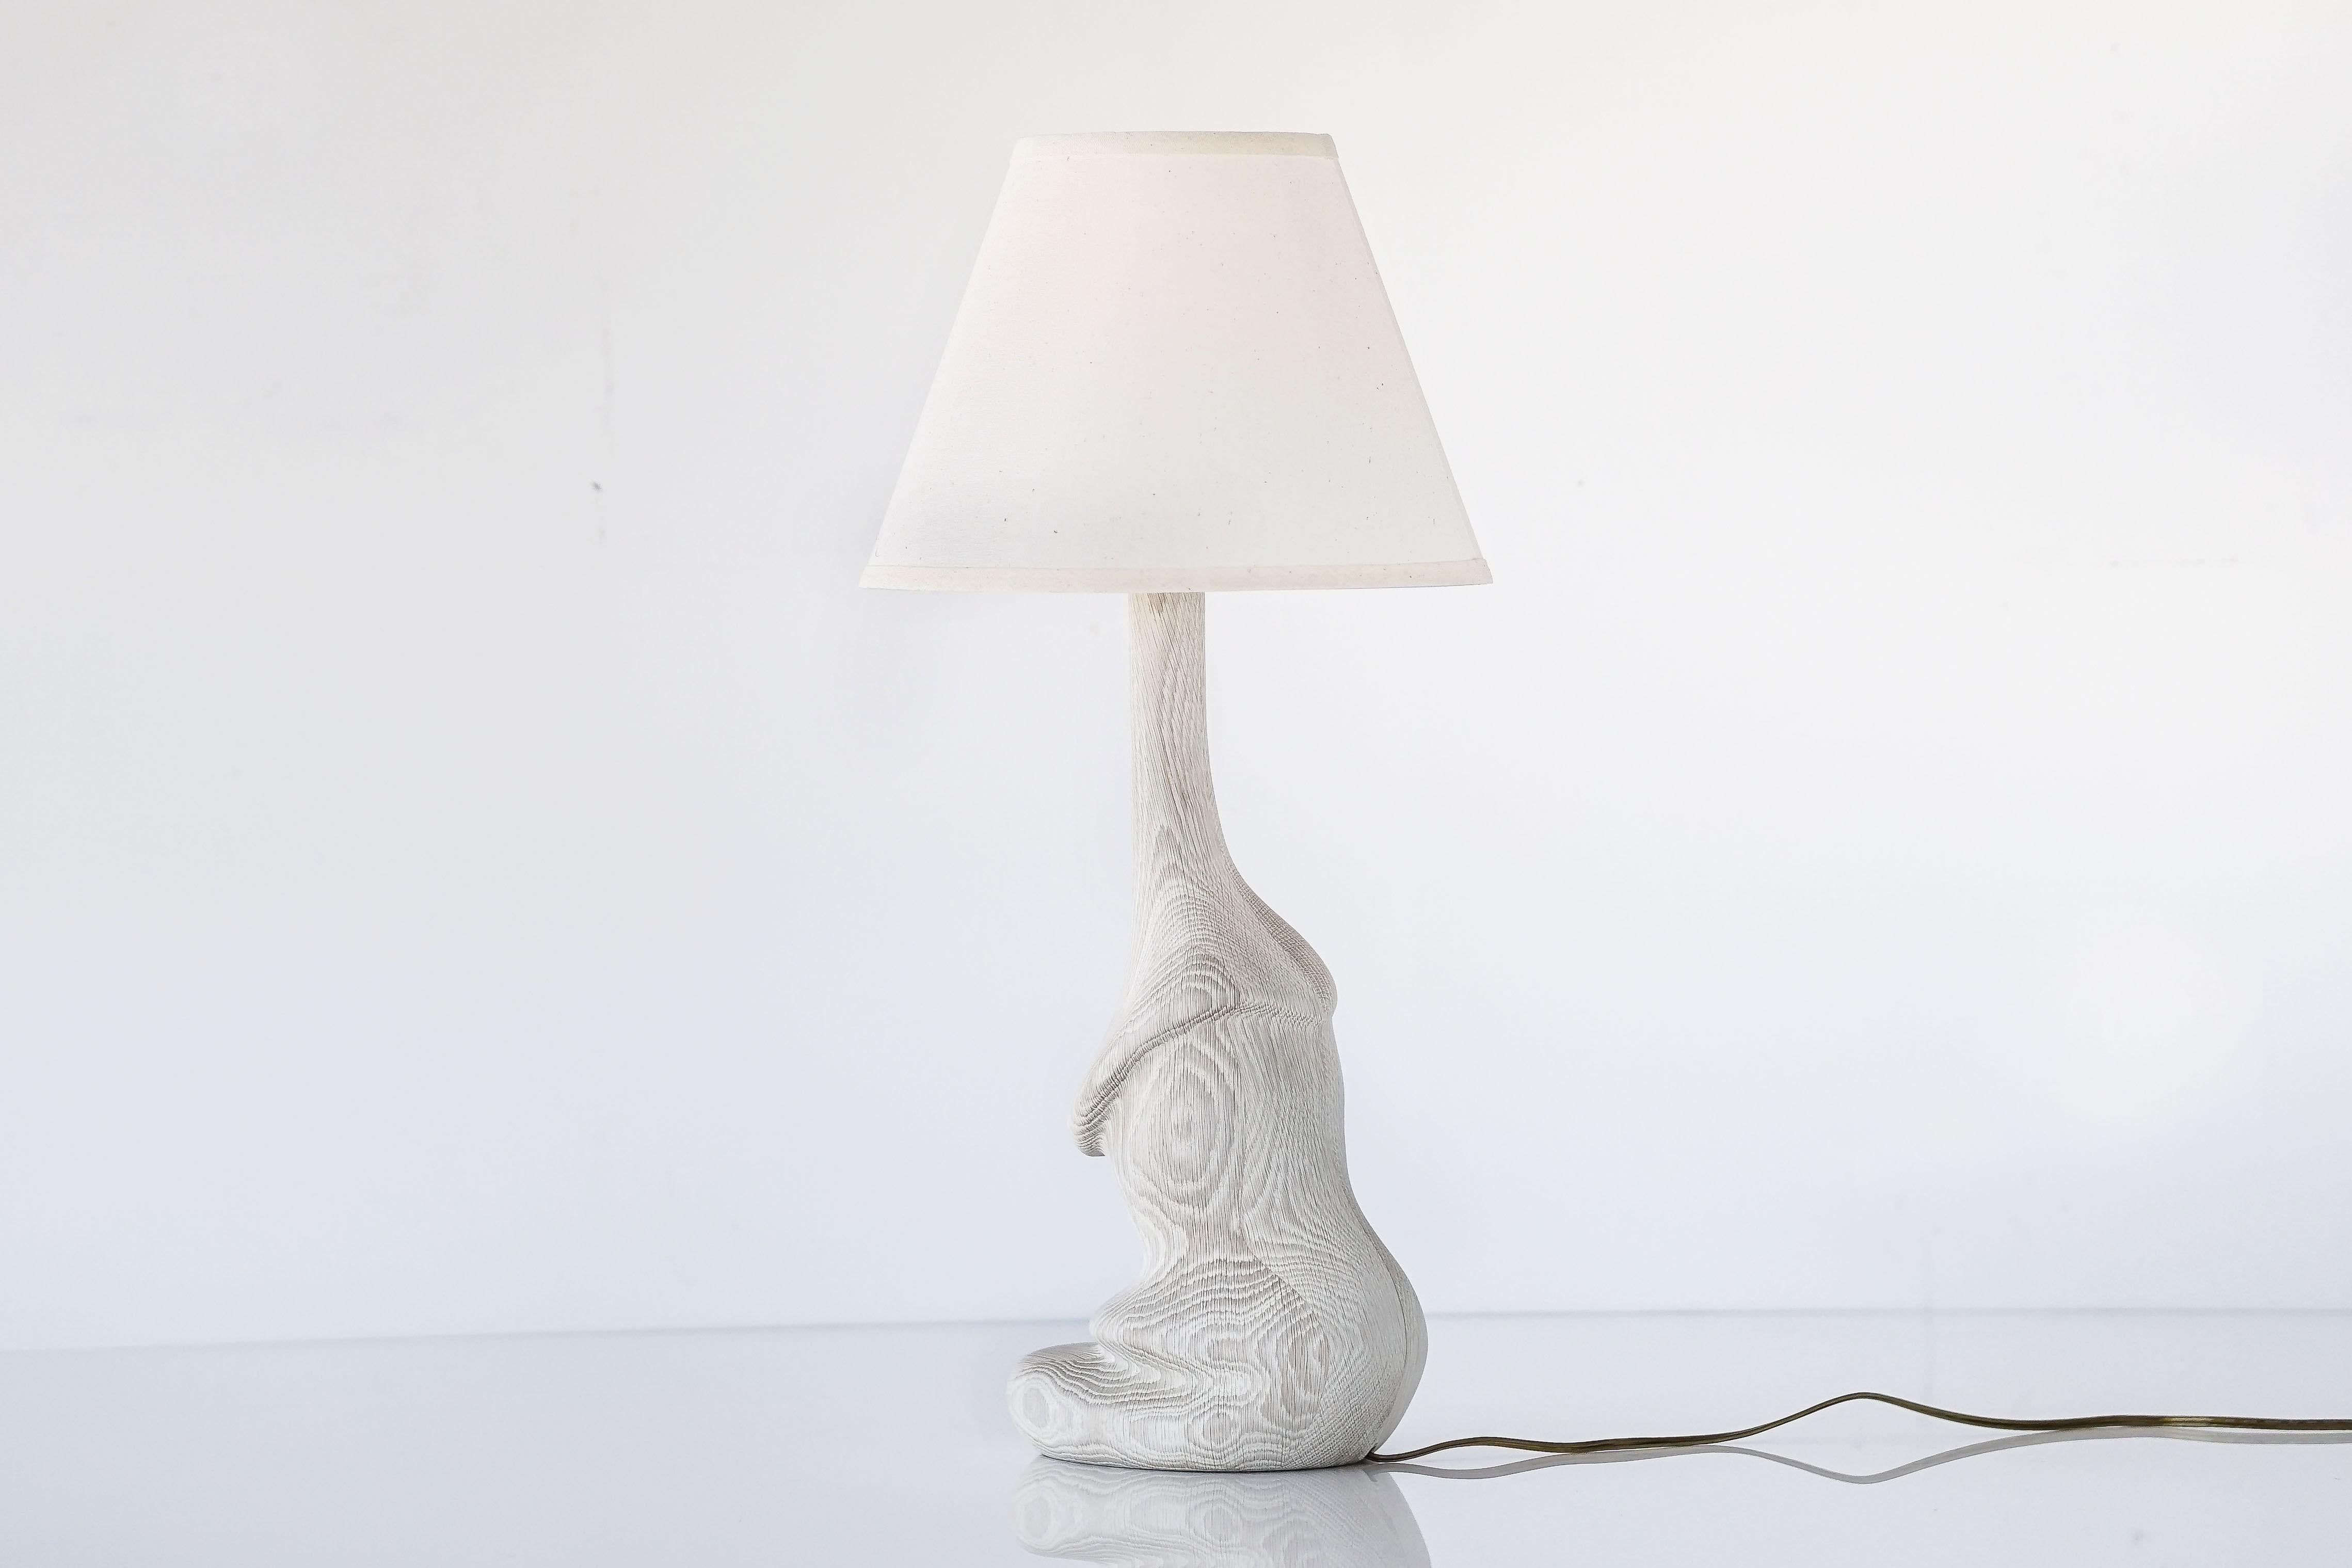 Organic Modern Carved Solid White Oakwood Fungi Organic Table Lamp with White Linen Lamp Shade For Sale